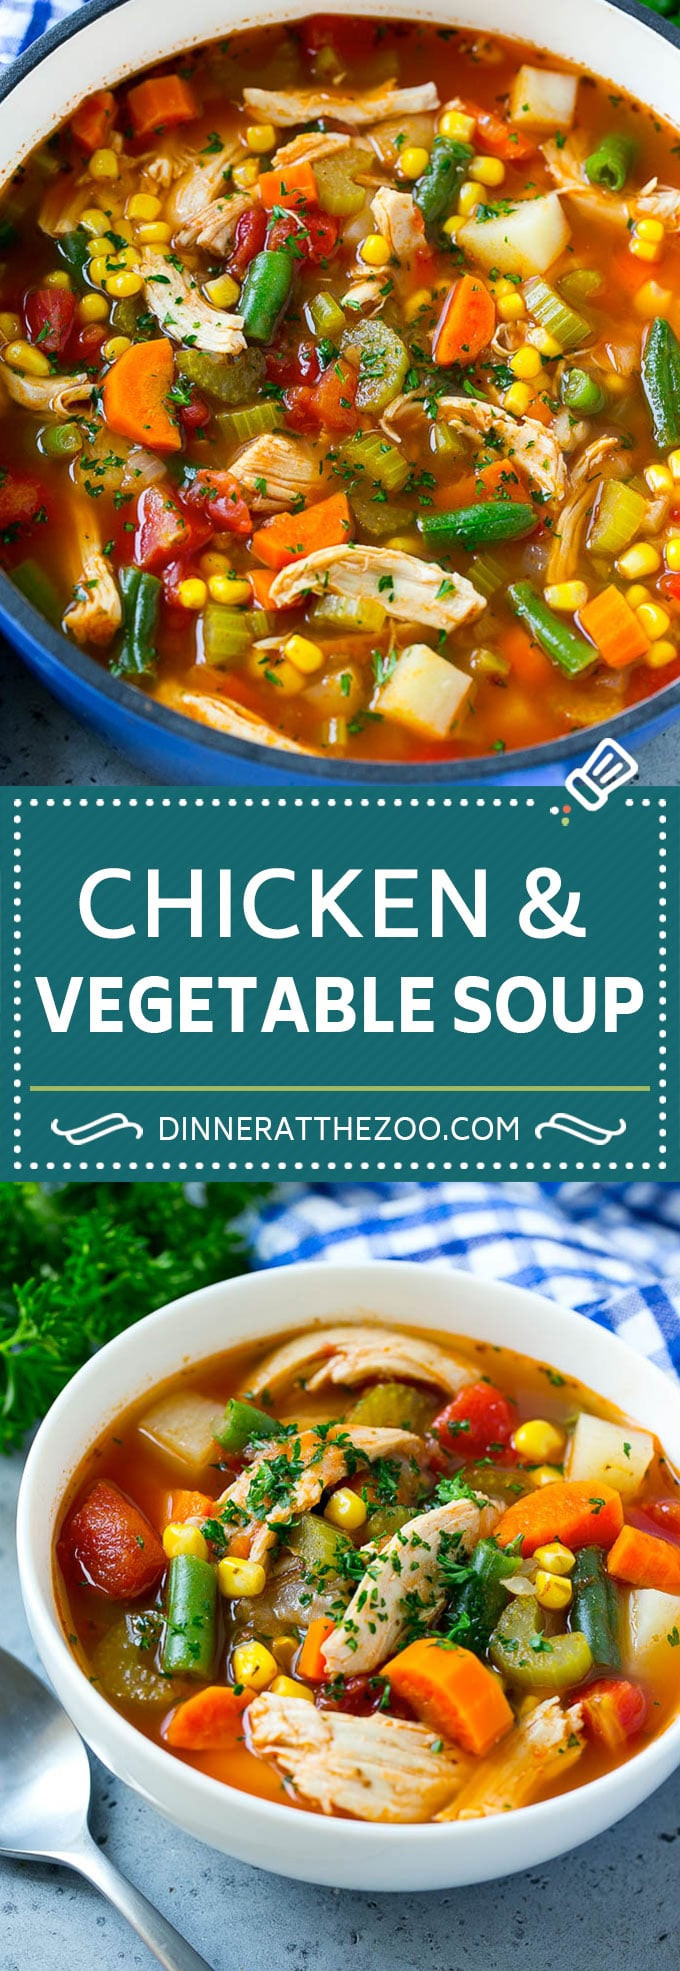 Healthy Chicken Vegetable Soup
 Chicken Ve able Soup Dinner at the Zoo